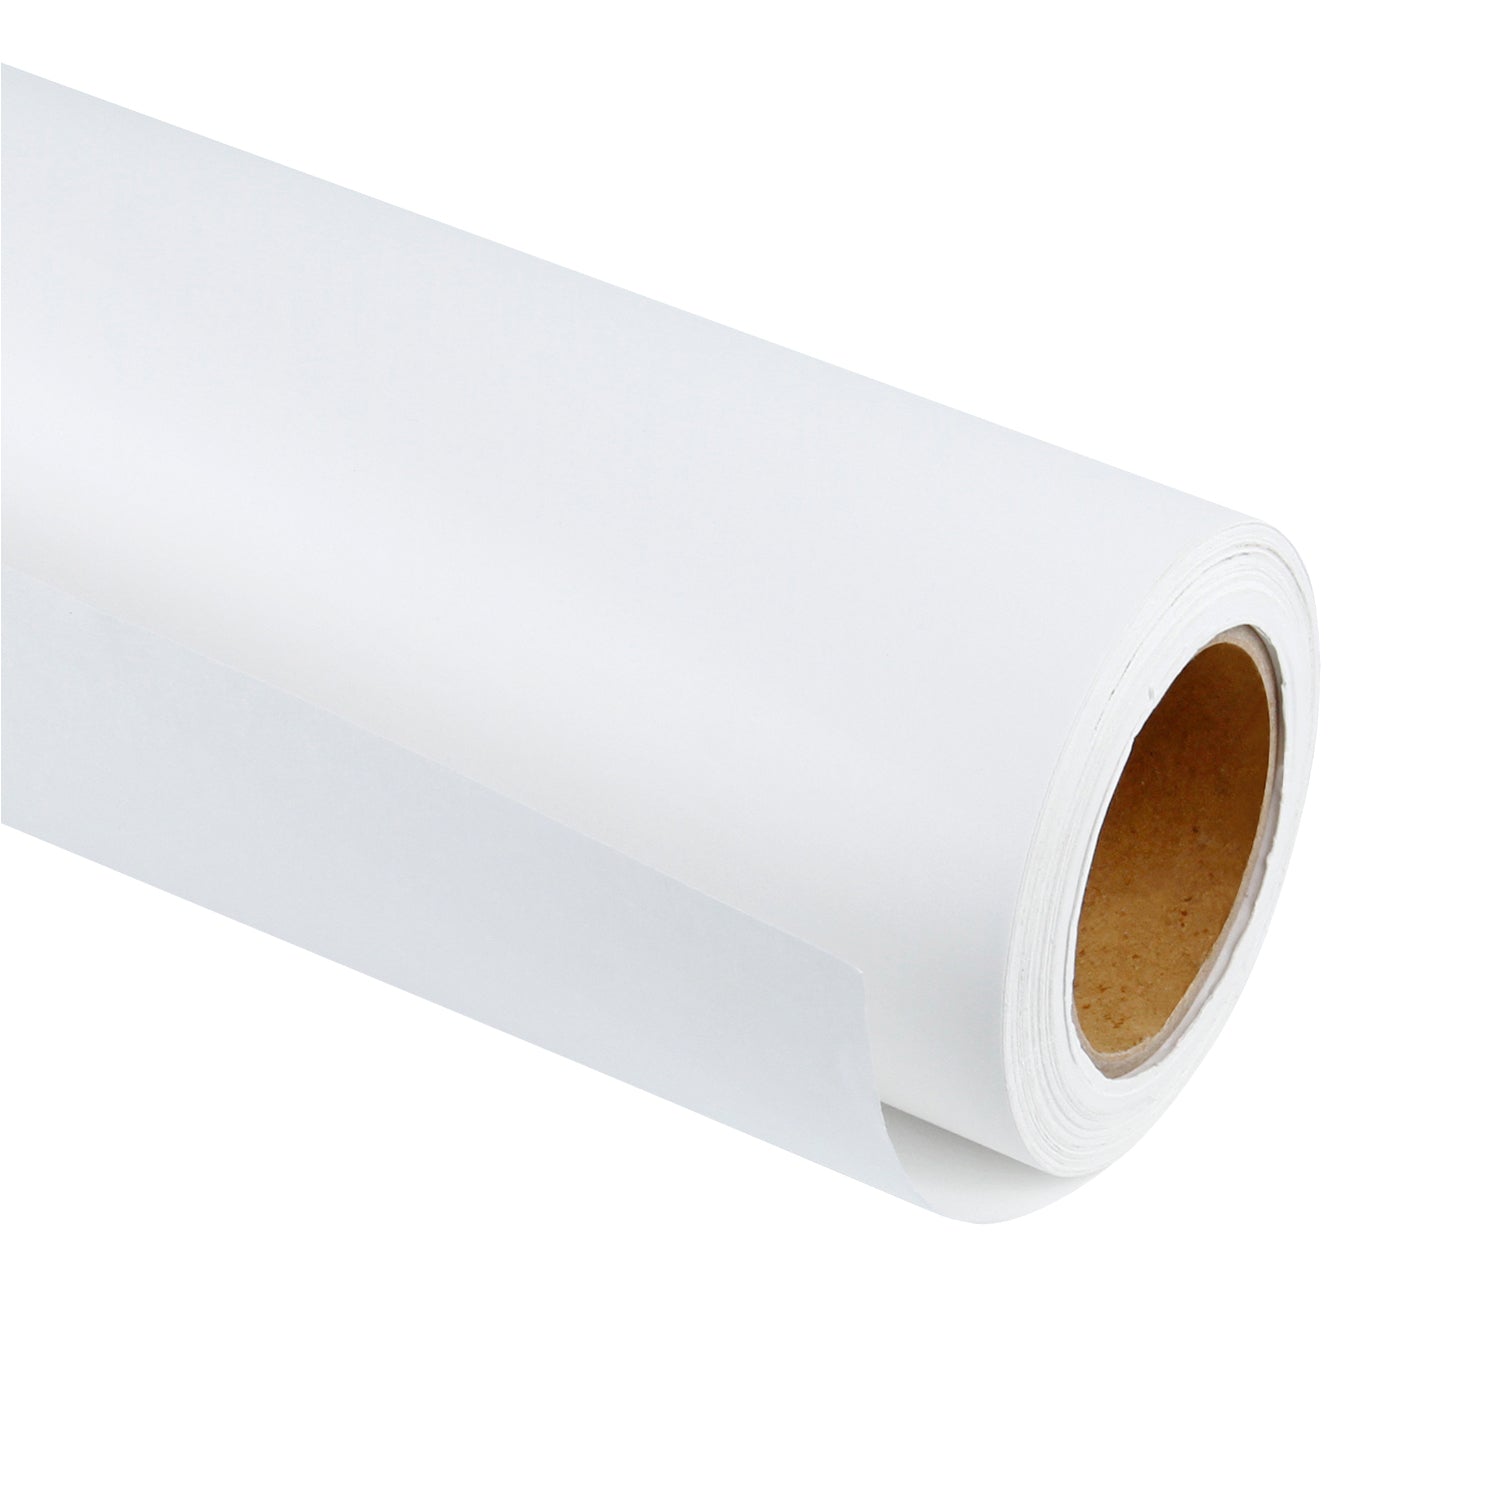 RUSPEPA White Kraft Paper Roll - 48 inches x 100 feet - Recyclable Paper  Perfect for Wrapping, Craft, Packing, Floor Covering, Dunnage, Parcel,  Table